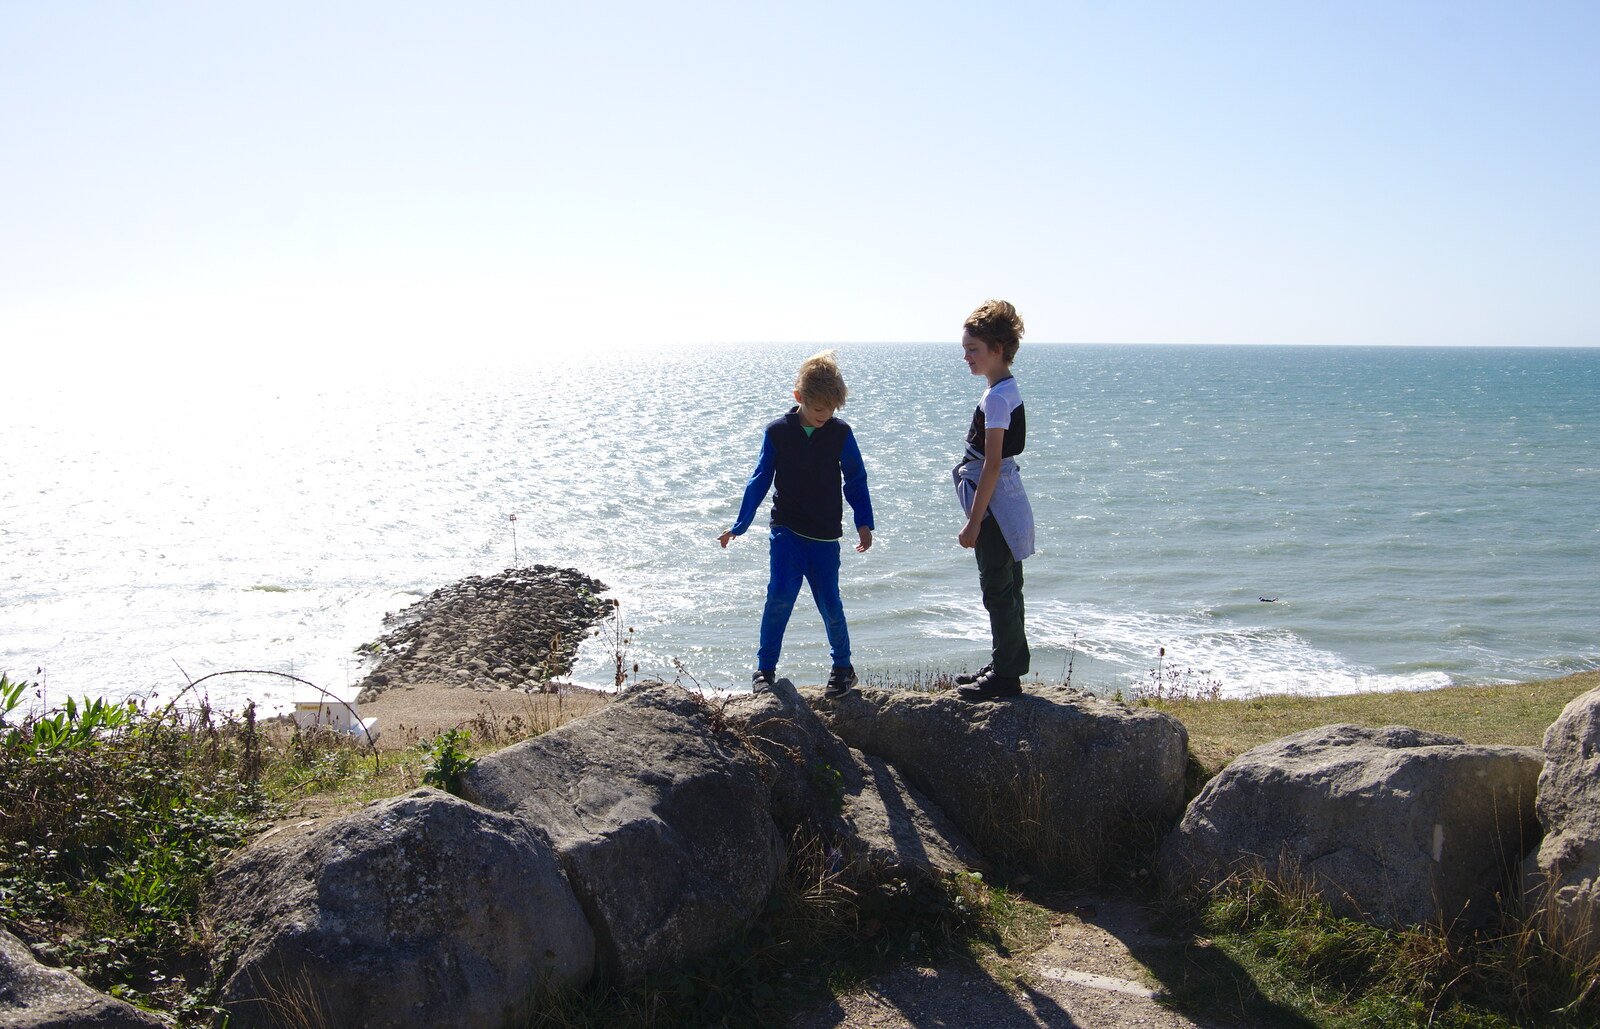 The boys on the top of the cliff from A Trip to the South Coast, Highcliffe, Dorset - 20th September 2019